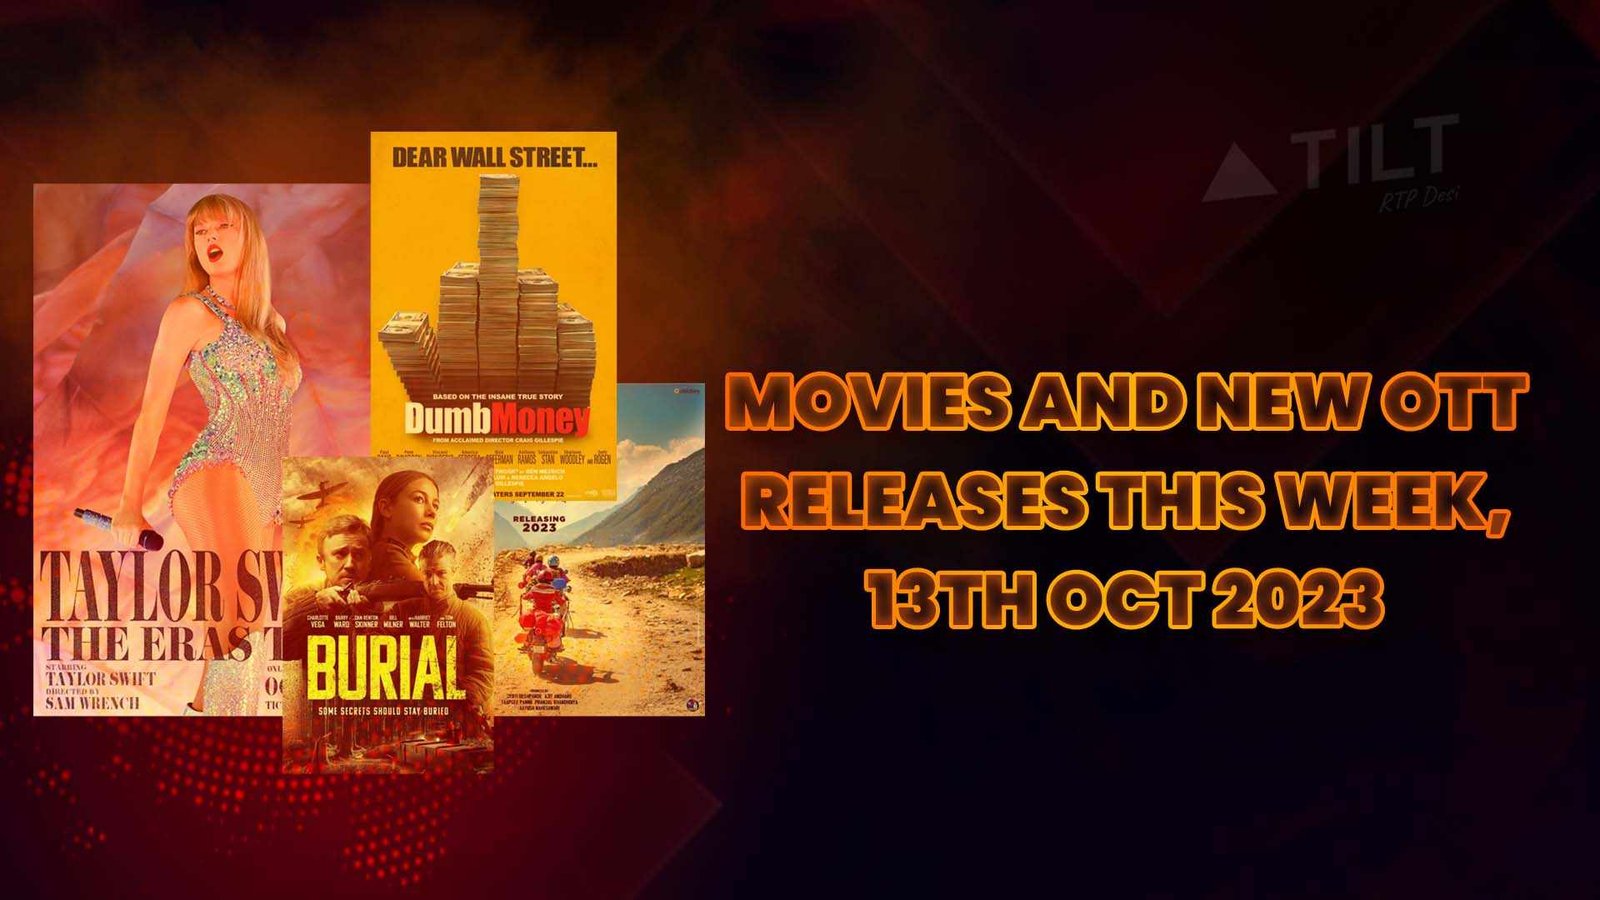 OTT Releases this Week, 13th Oct 2023